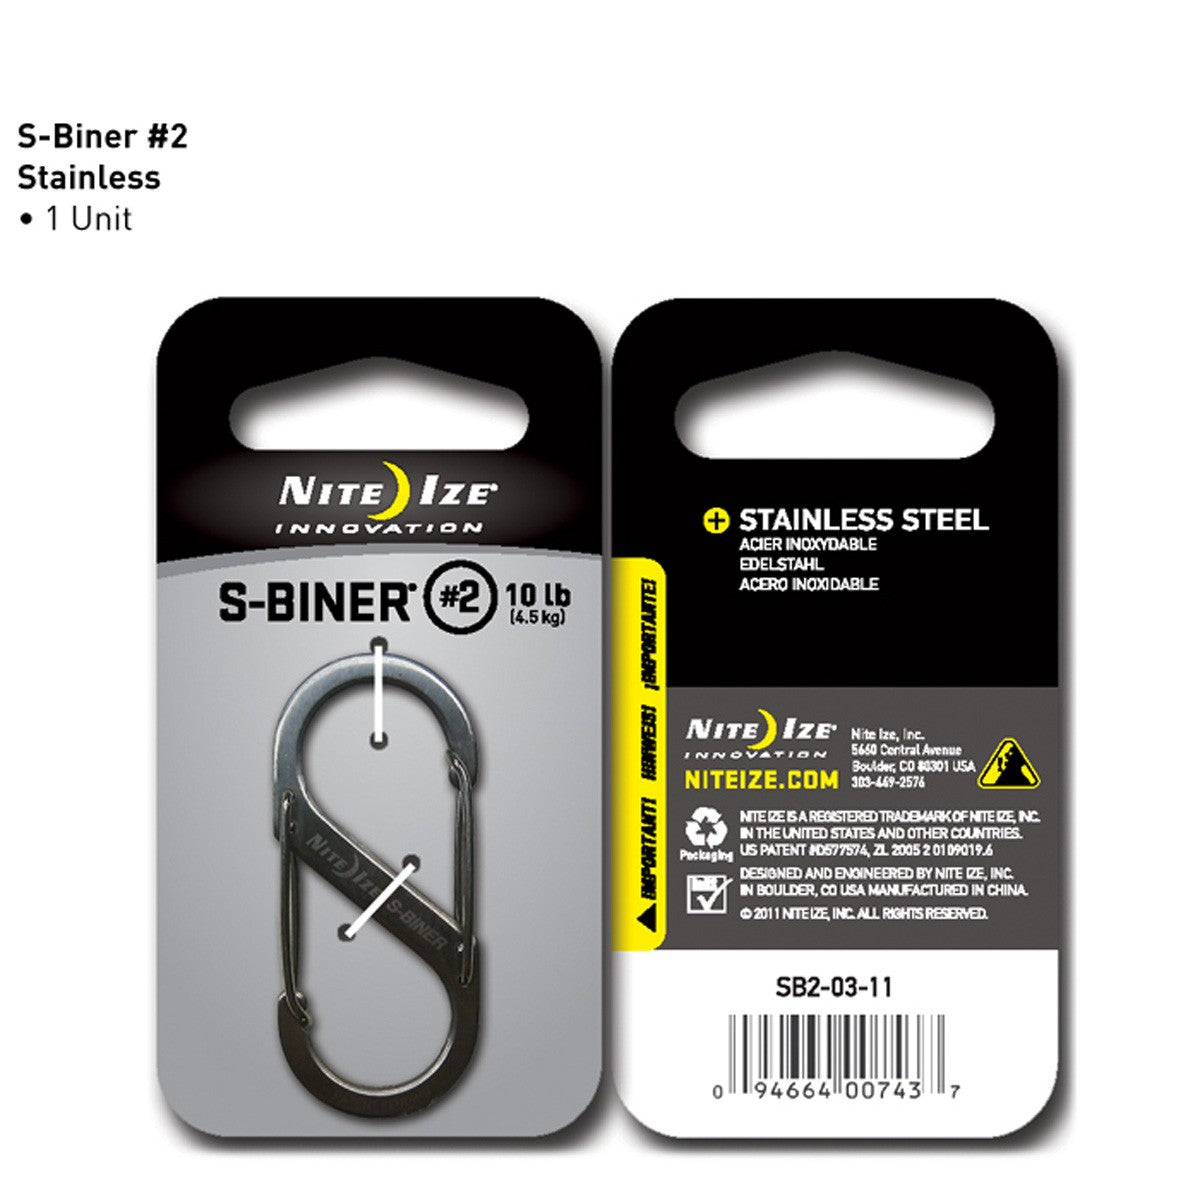 S-Biner Steel No2 - Stainless